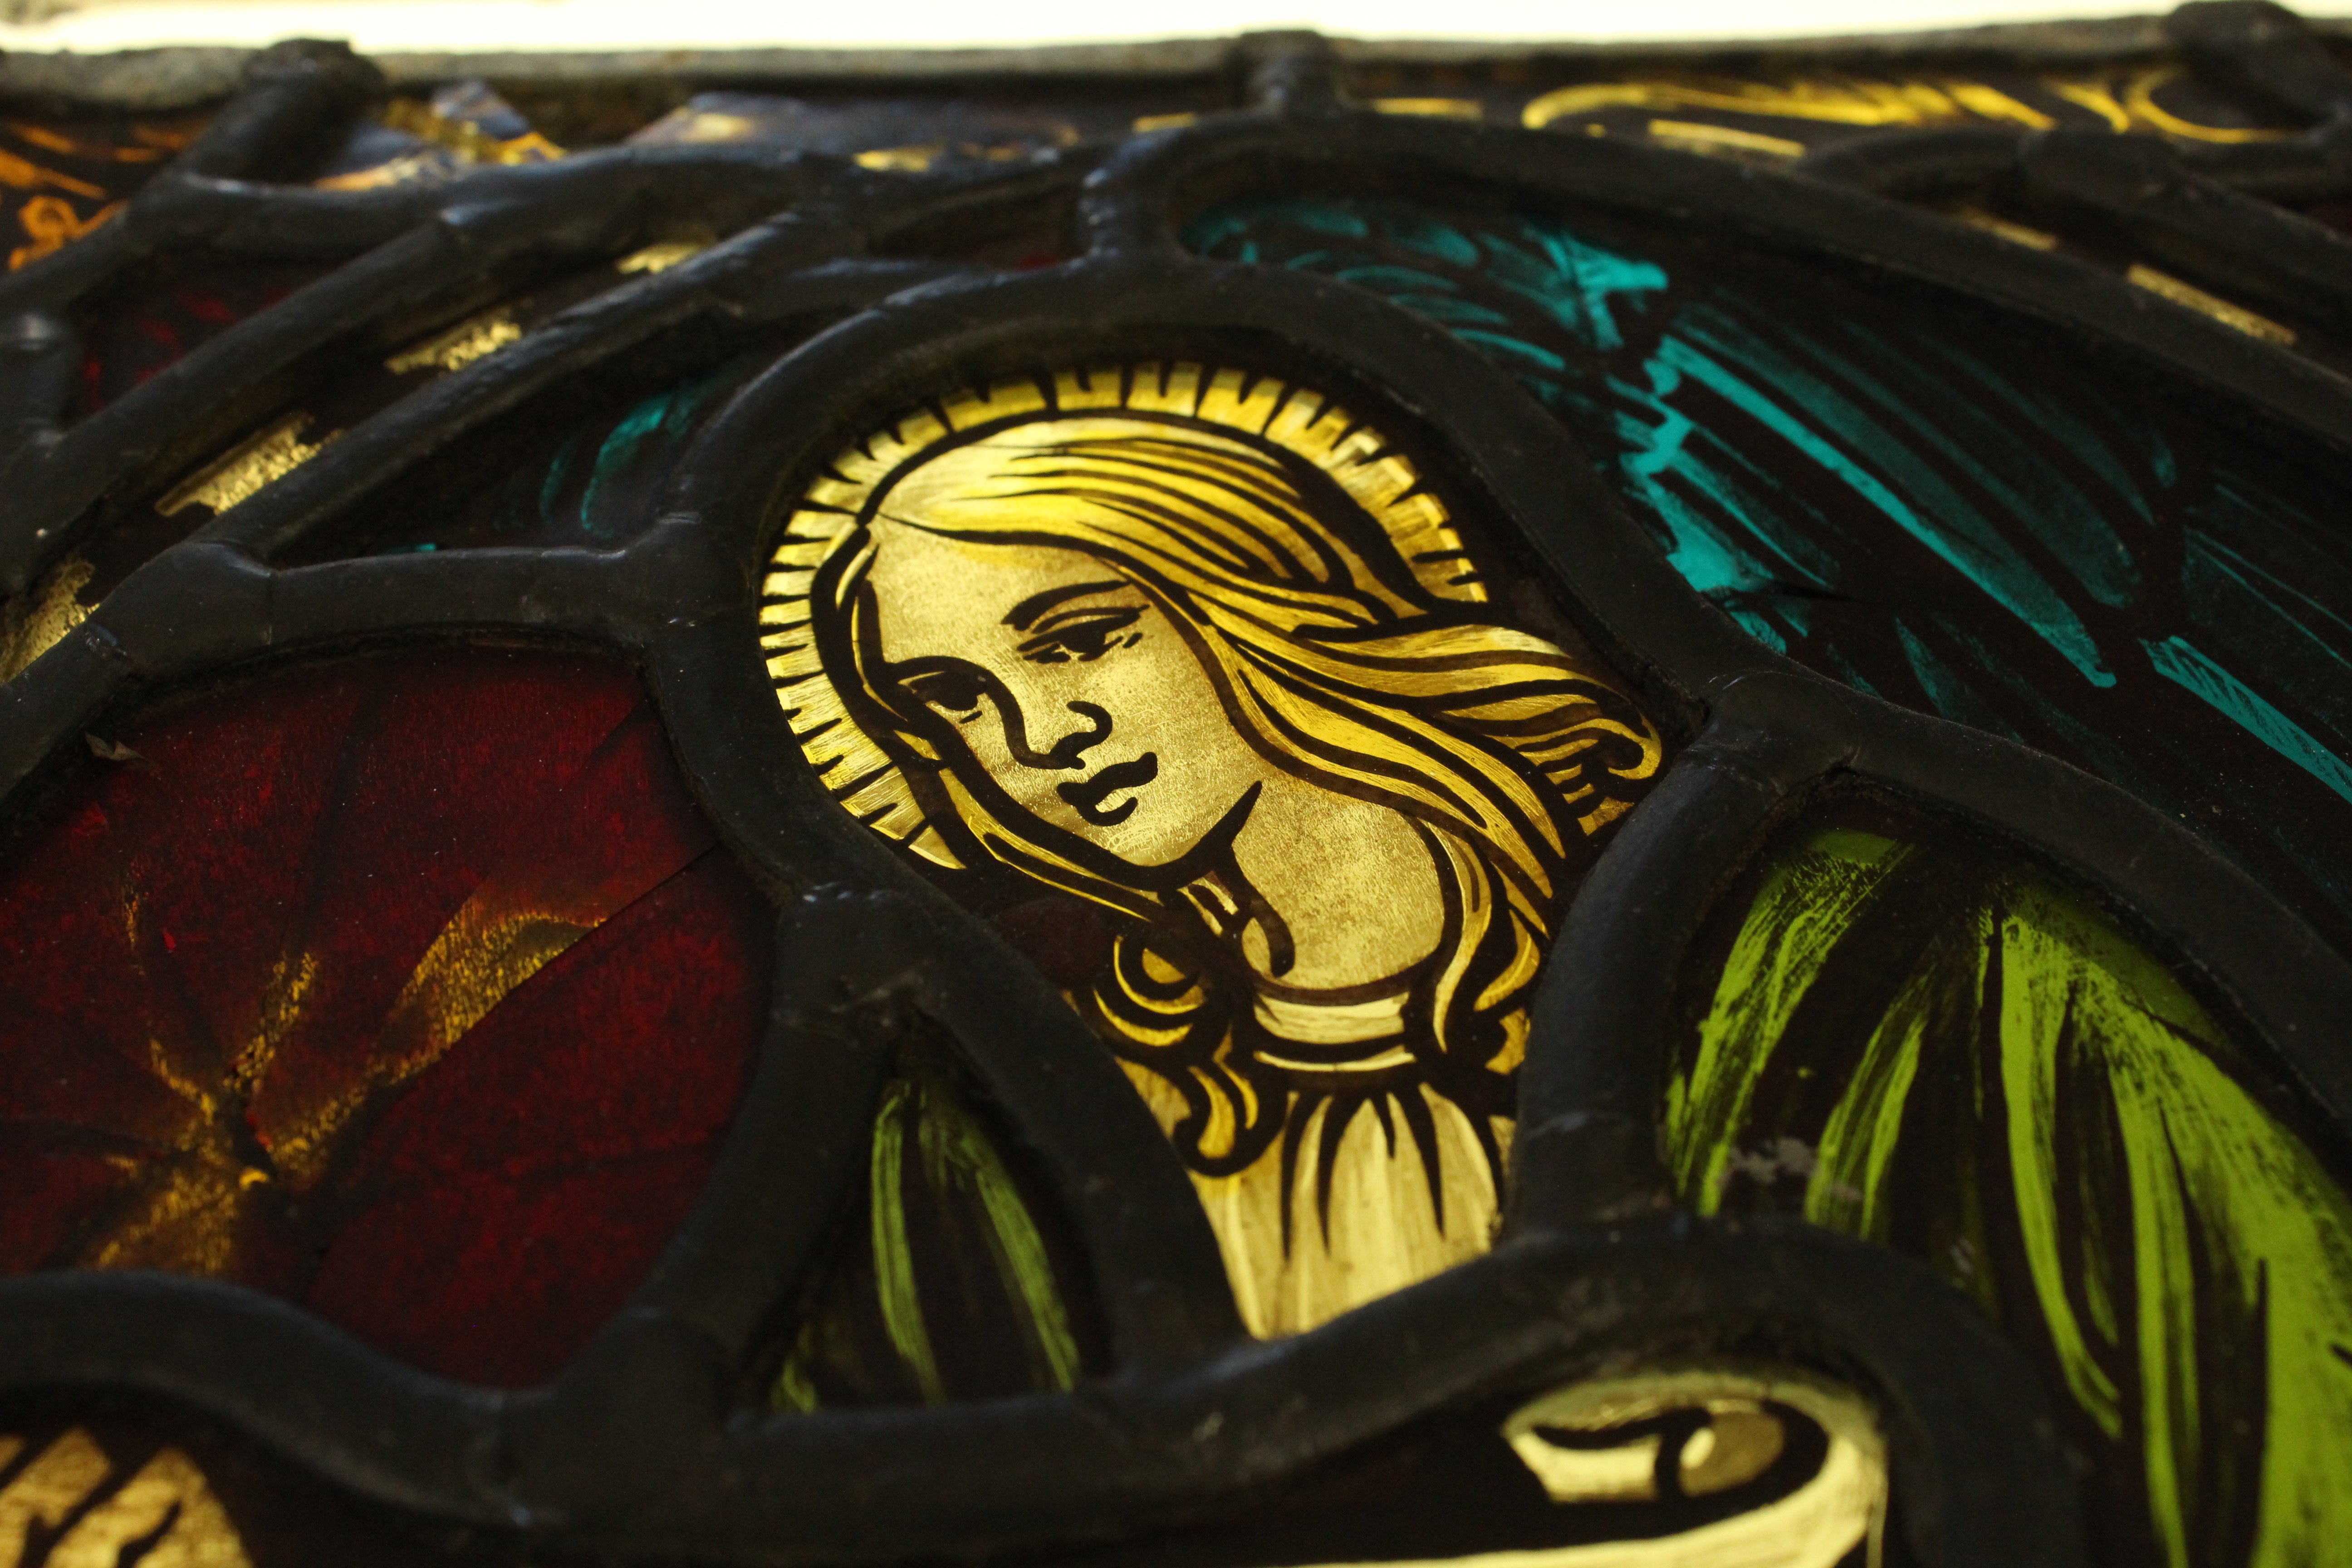 Detail of the face of the angel in the right stained glass panel.